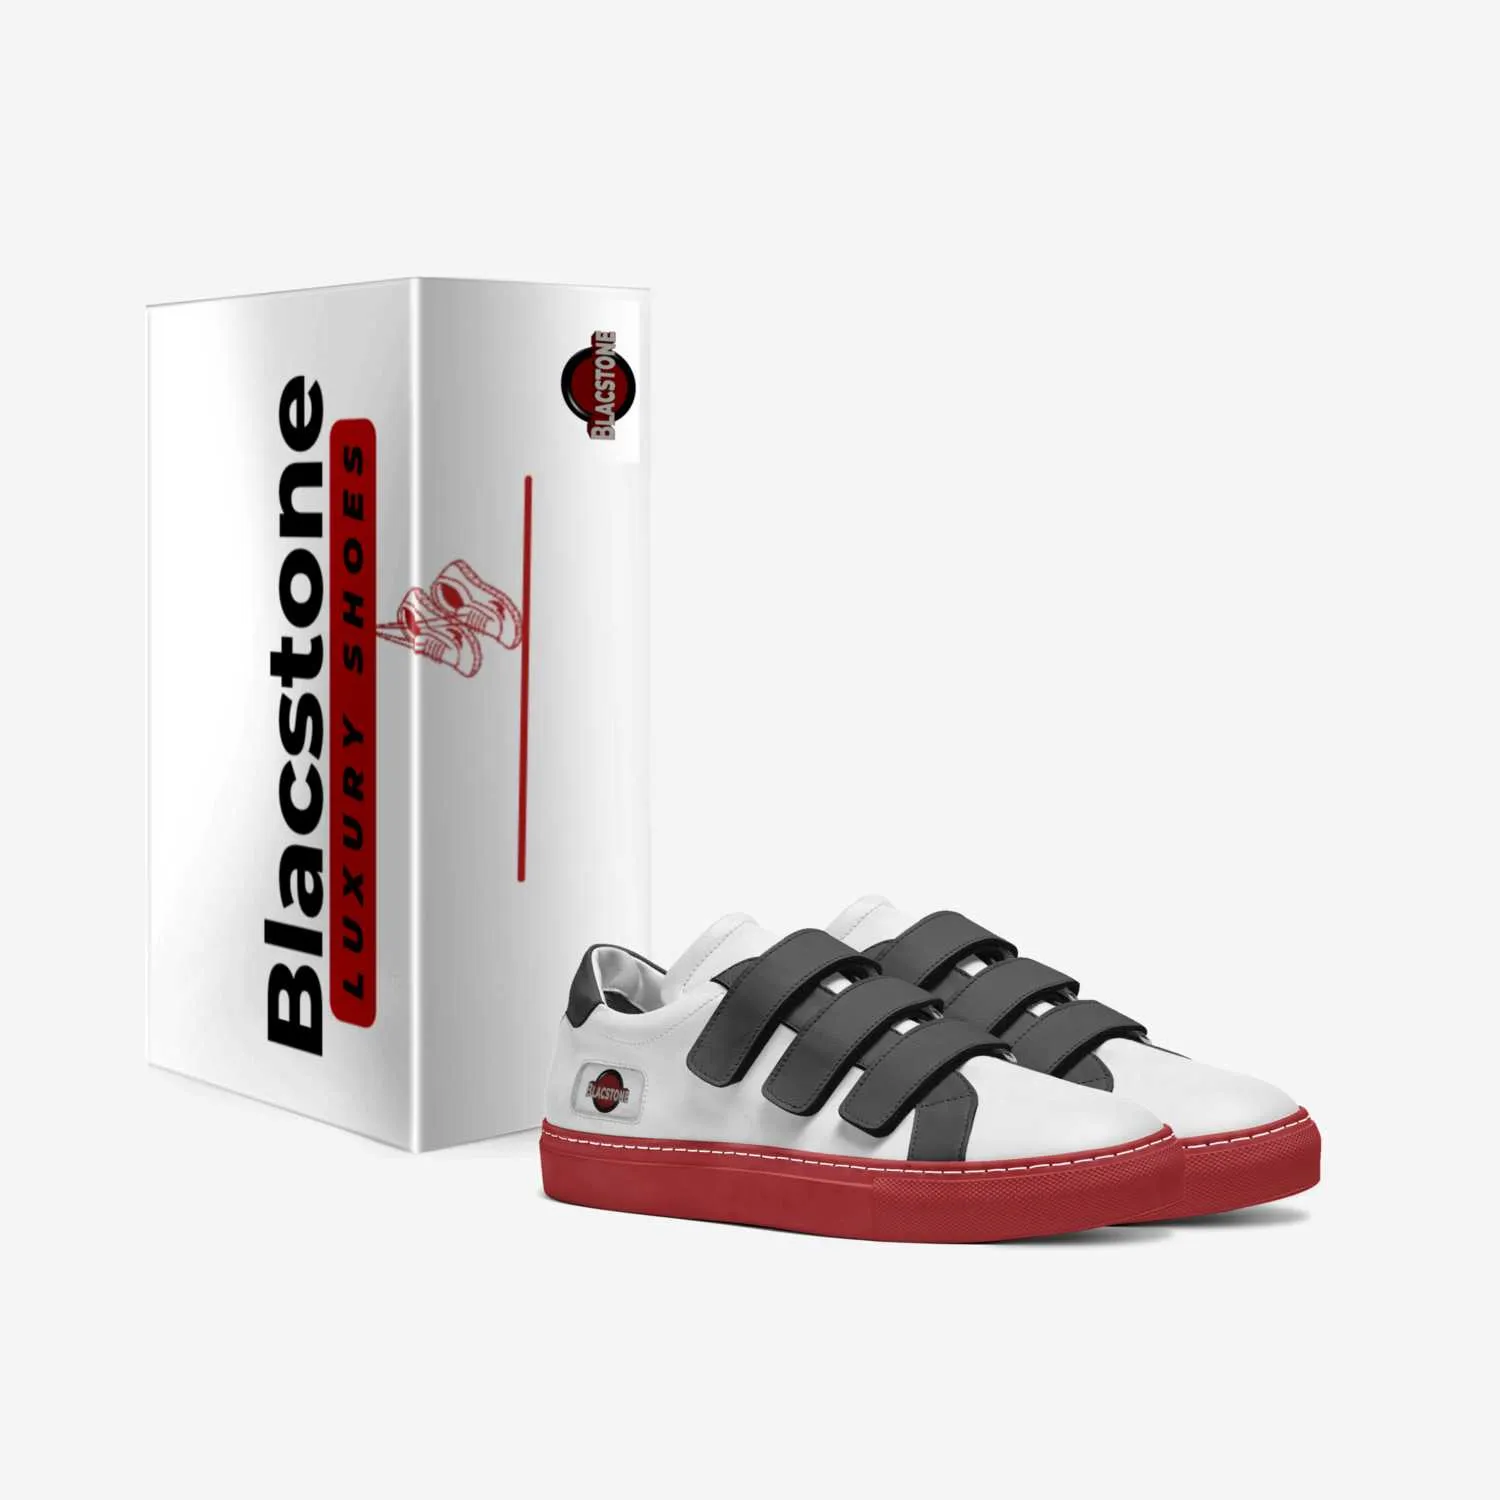 <limited edition shoes by Blacstone colors white, black, and red>